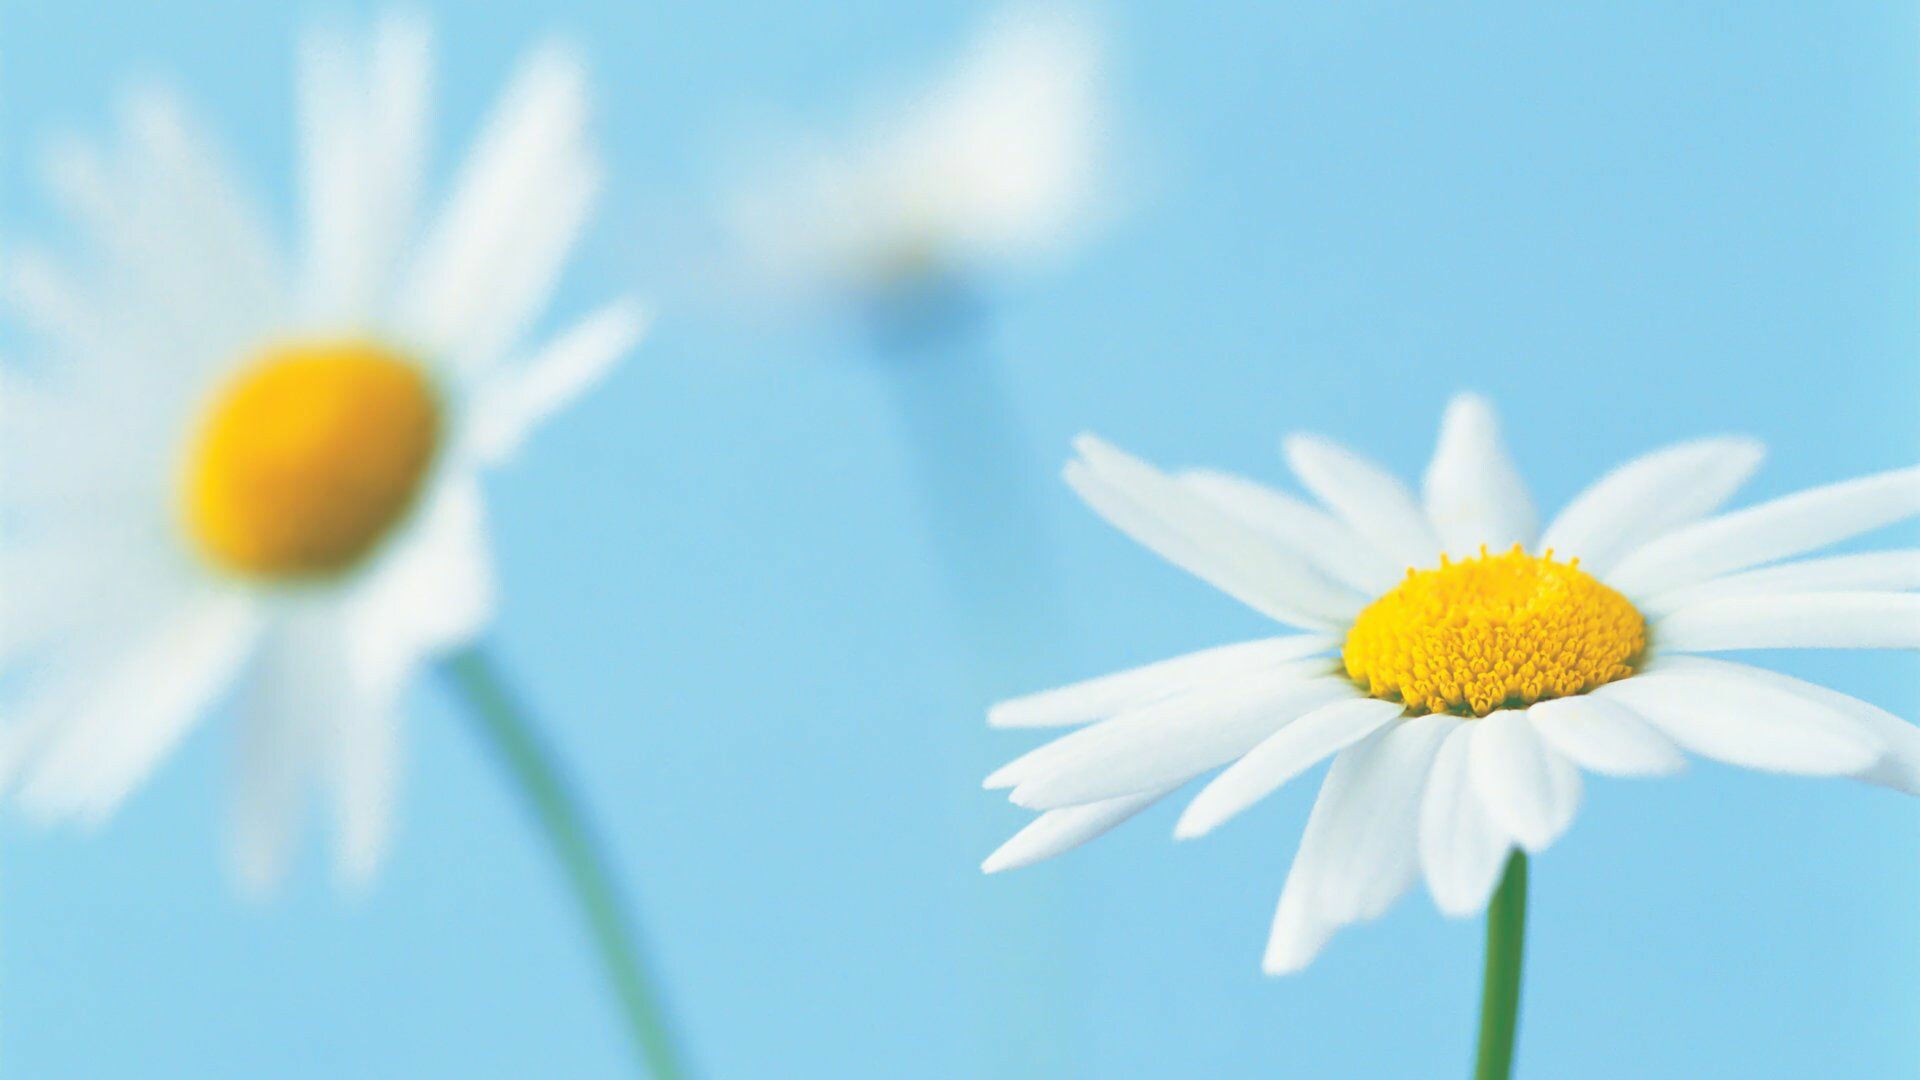 Daisy: A happy-face flower with radiating white petals around a yellow center. 1920x1080 Full HD Background.